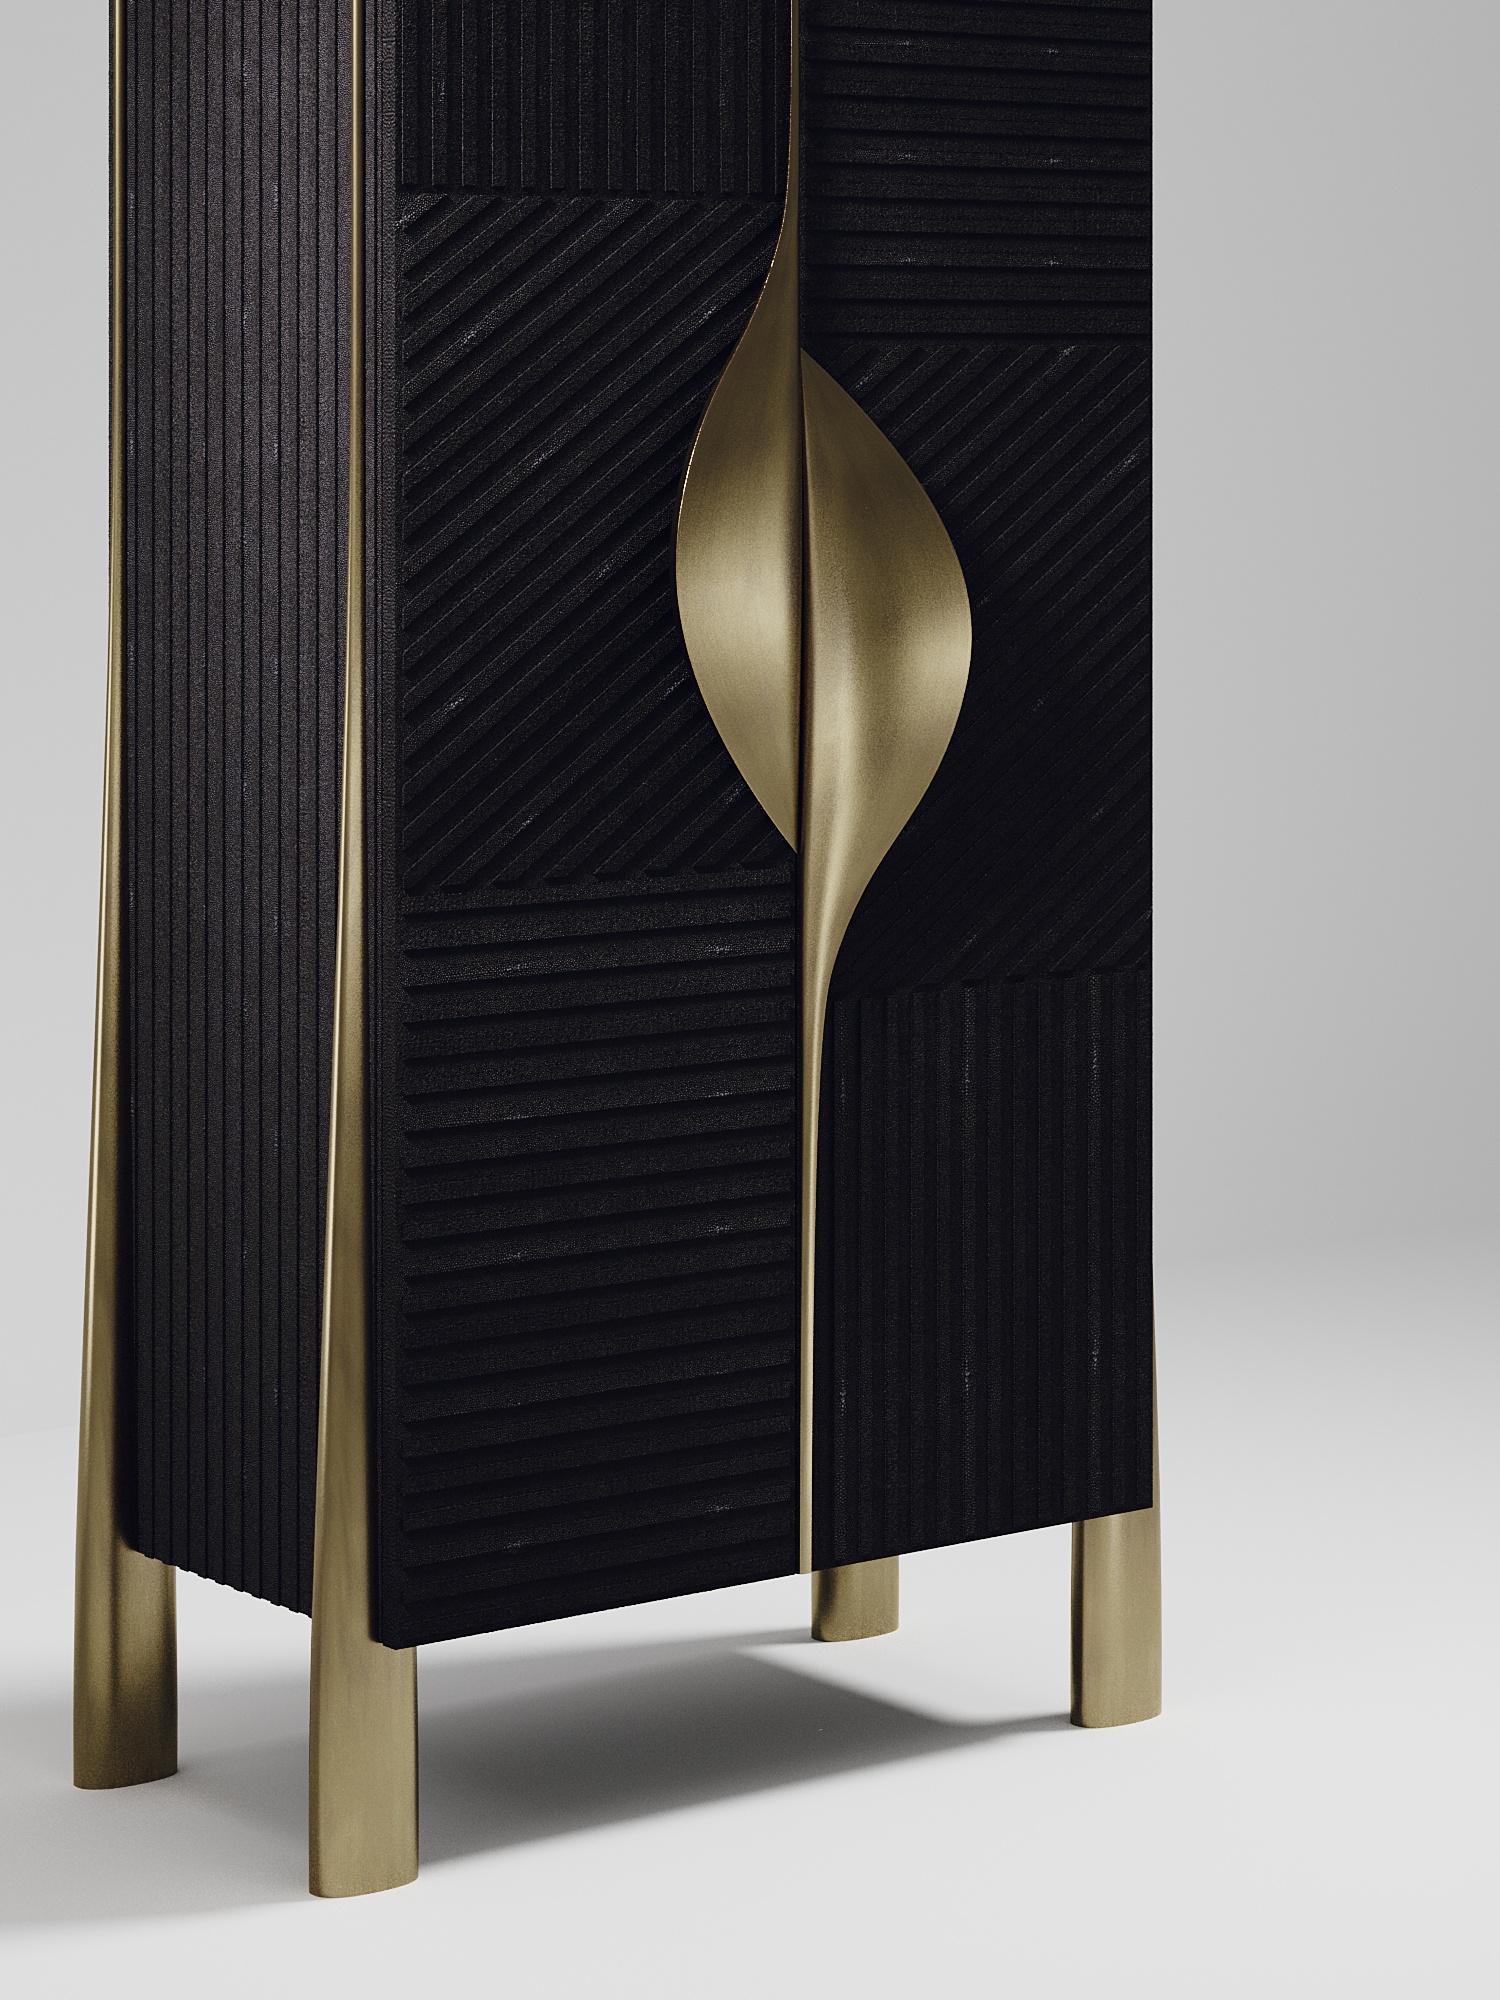 The wave bar cabinet by R&Y Augousti is one of a kind statement piece. The overall piece is inlaid in black shagreen, with the exterior hand-carved in an updated version of the signature Augousti 